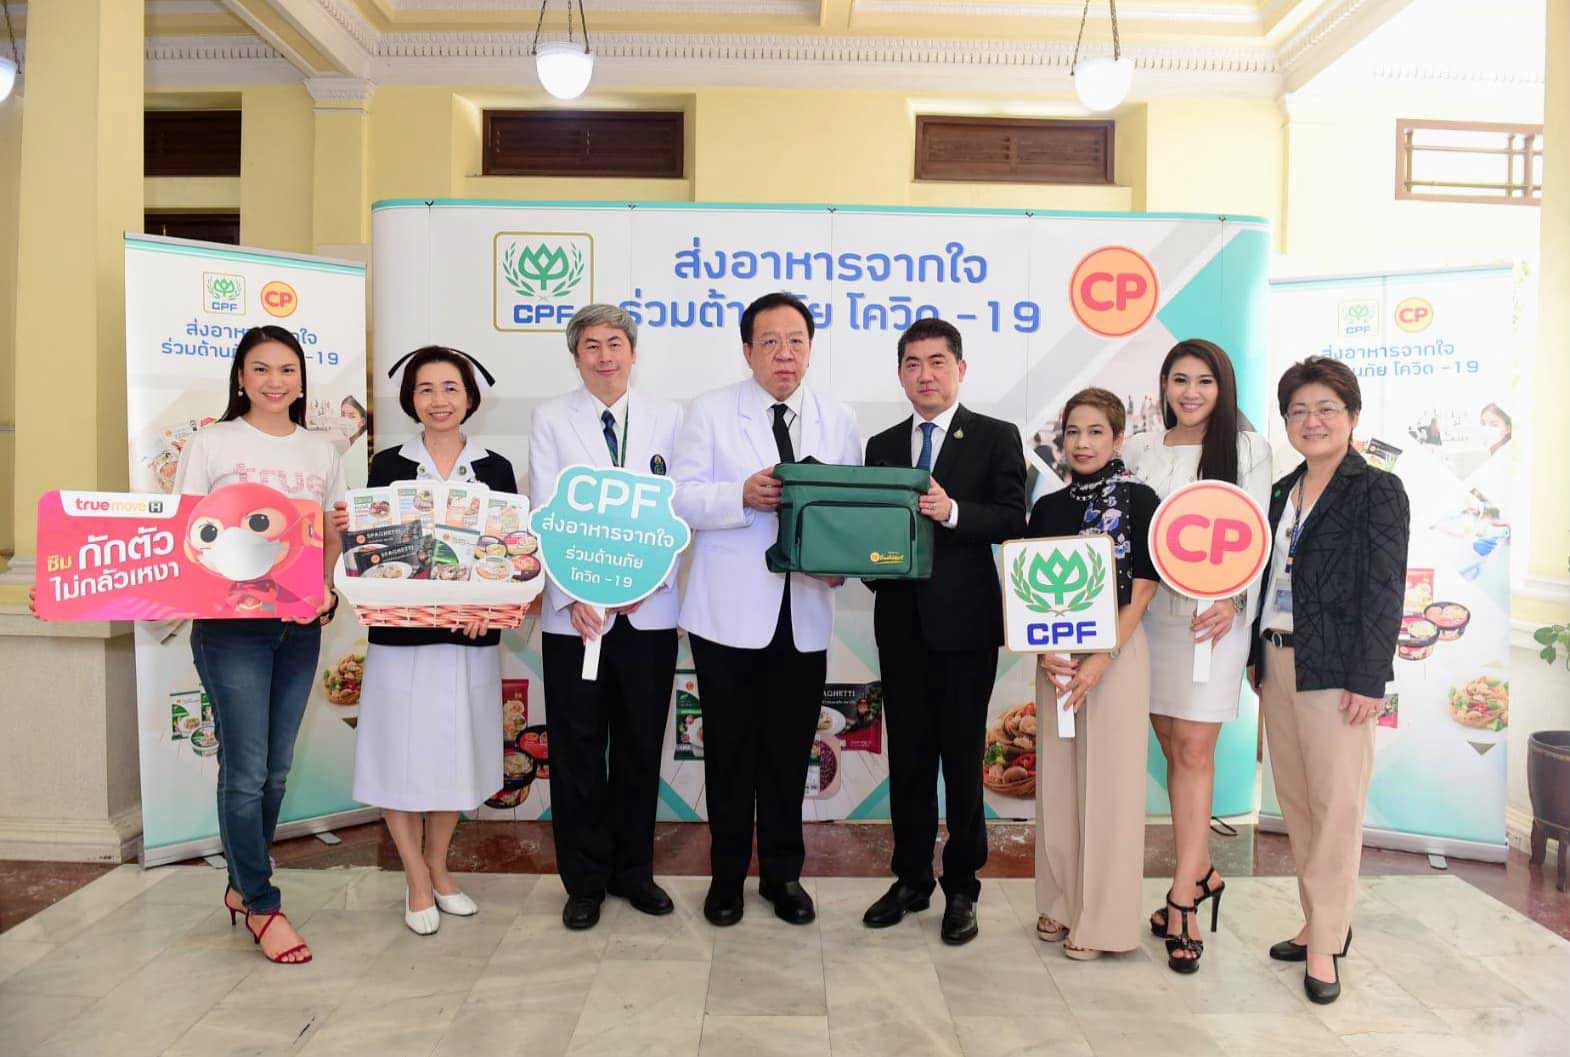 CPF continues its "CPF's food from the heart against COVID-19" project at Siriraj Hospital